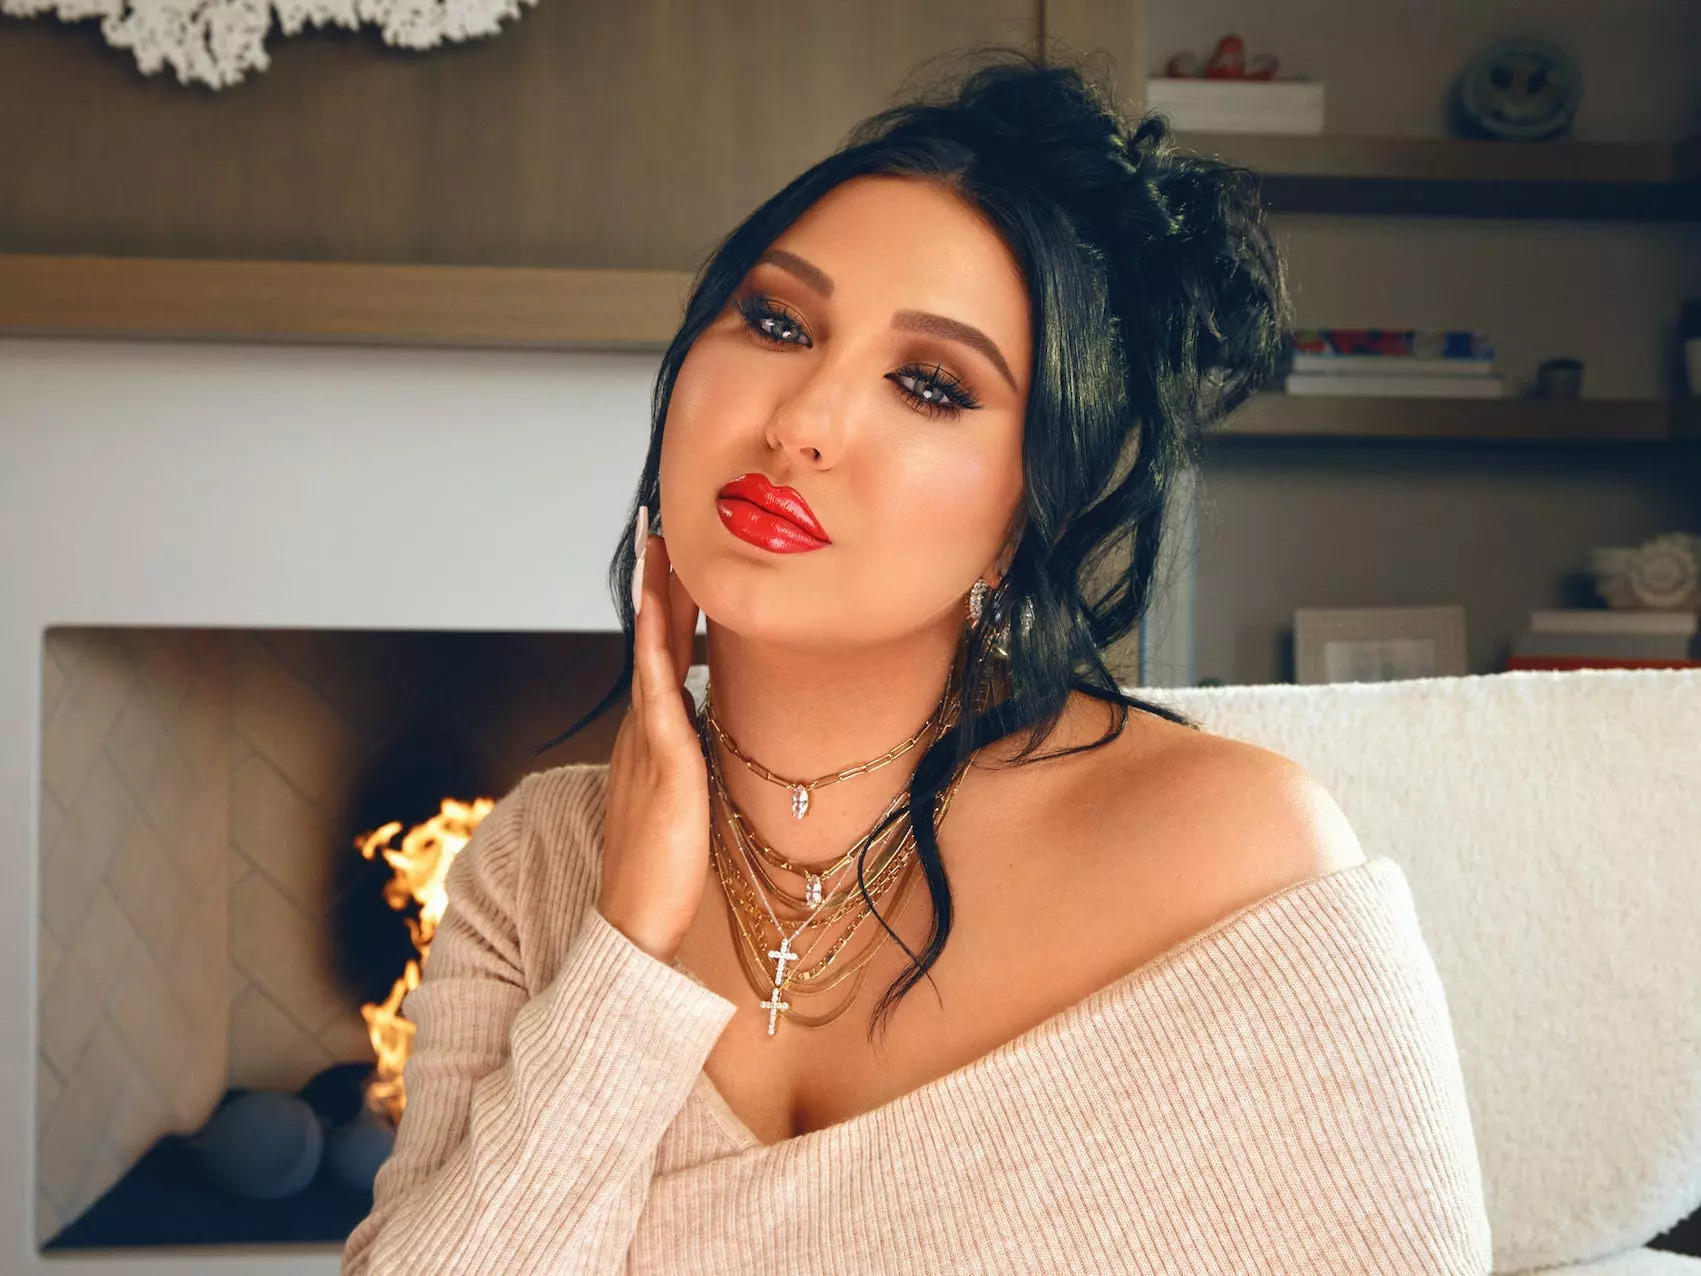 Jaclyn Hill defends Meredith Duxbury’s controversial make-up routine: ‘I like that she smothers her face in basis’